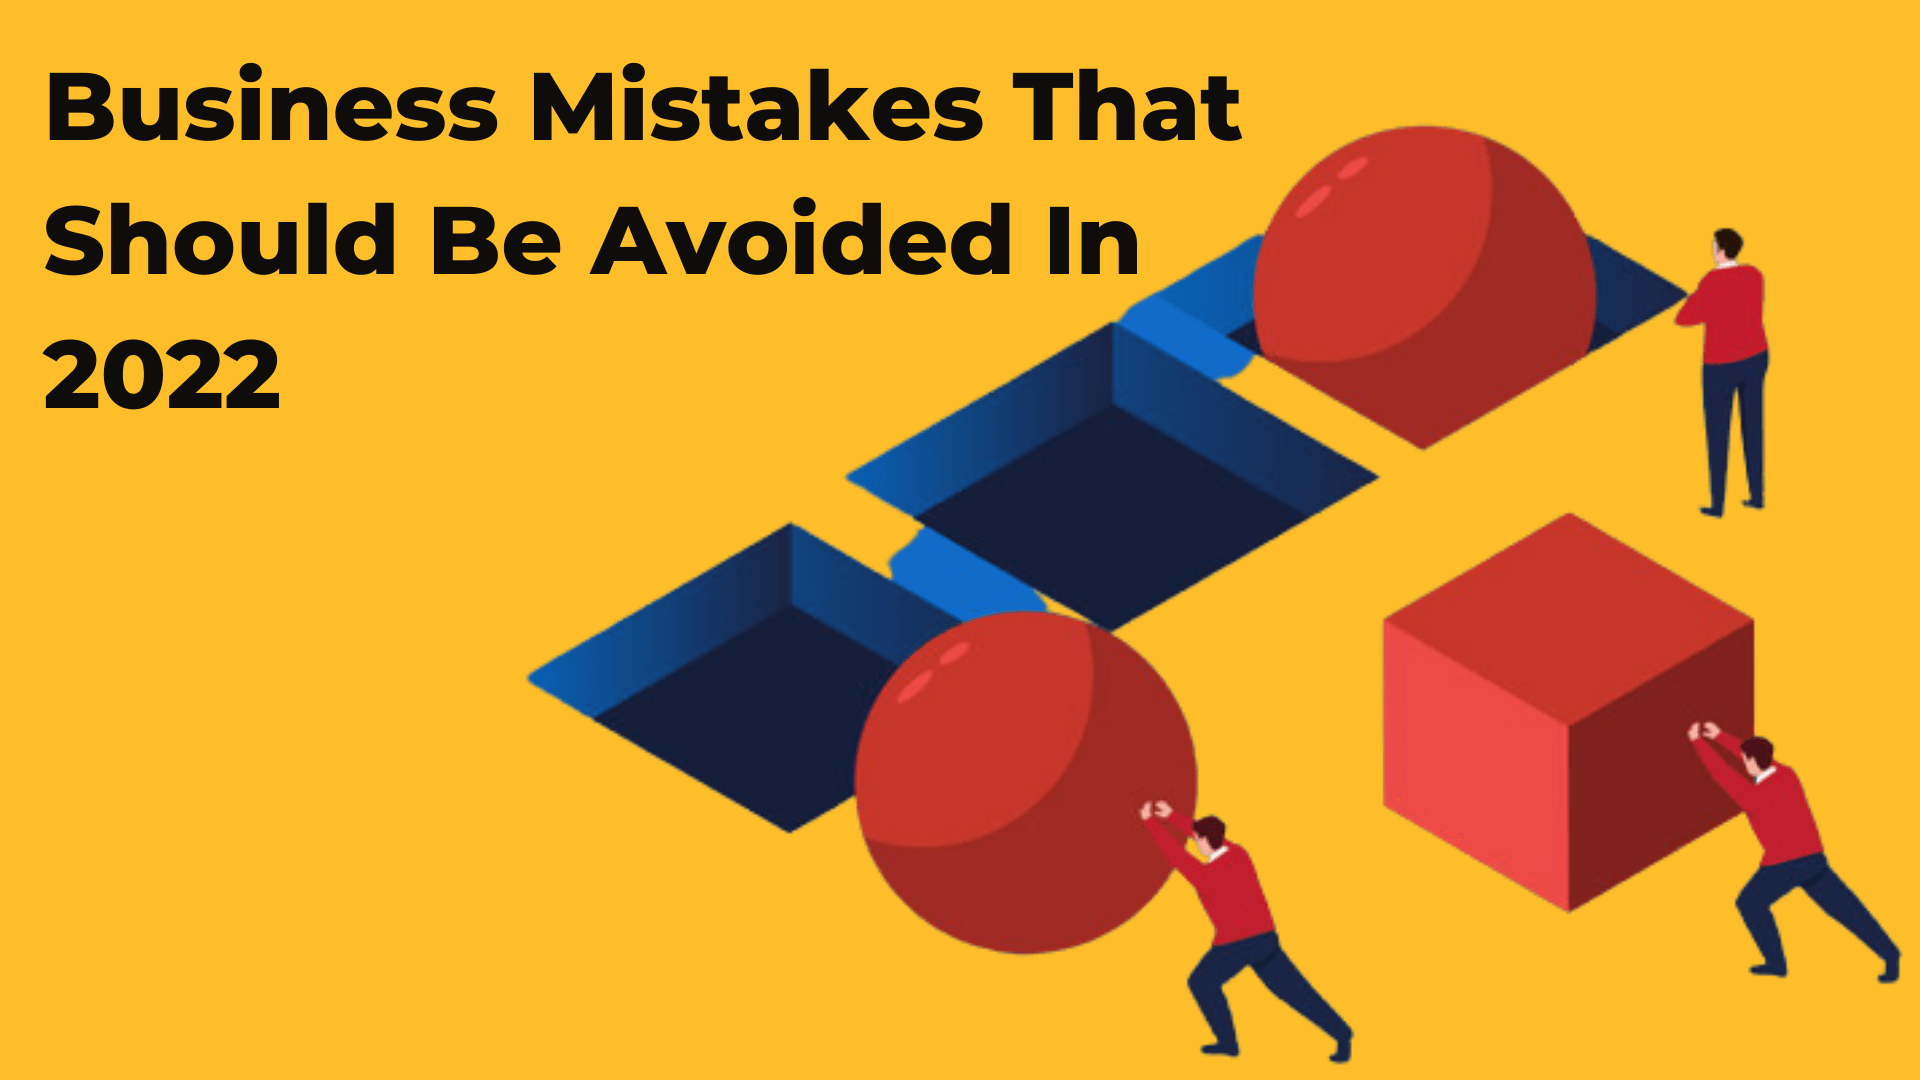 Business Mistakes That Should Be Avoided In 2022